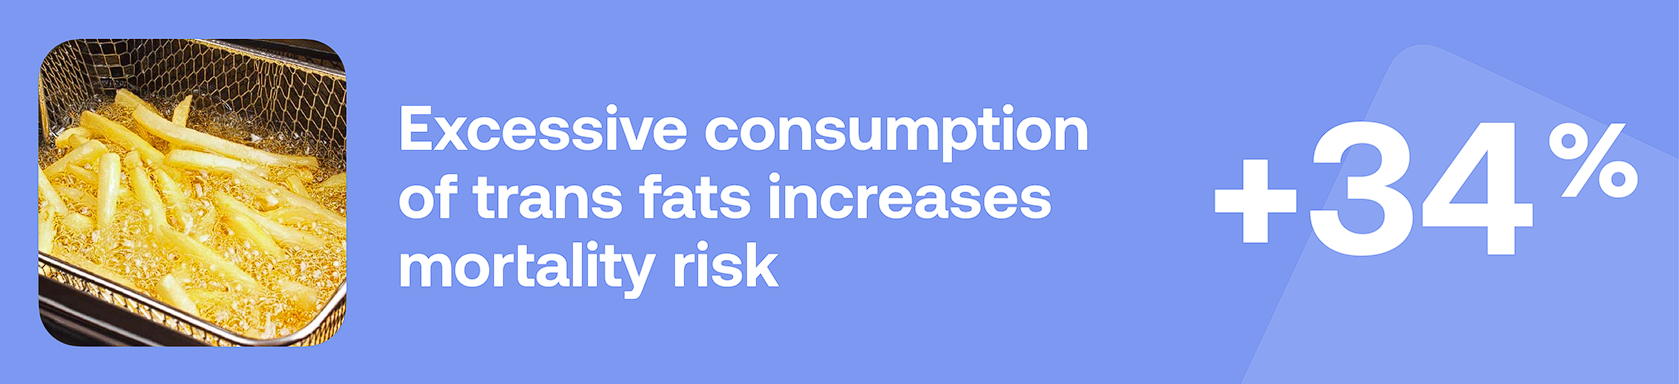 Excessive consumption of trans fats increases mortality risk +34%